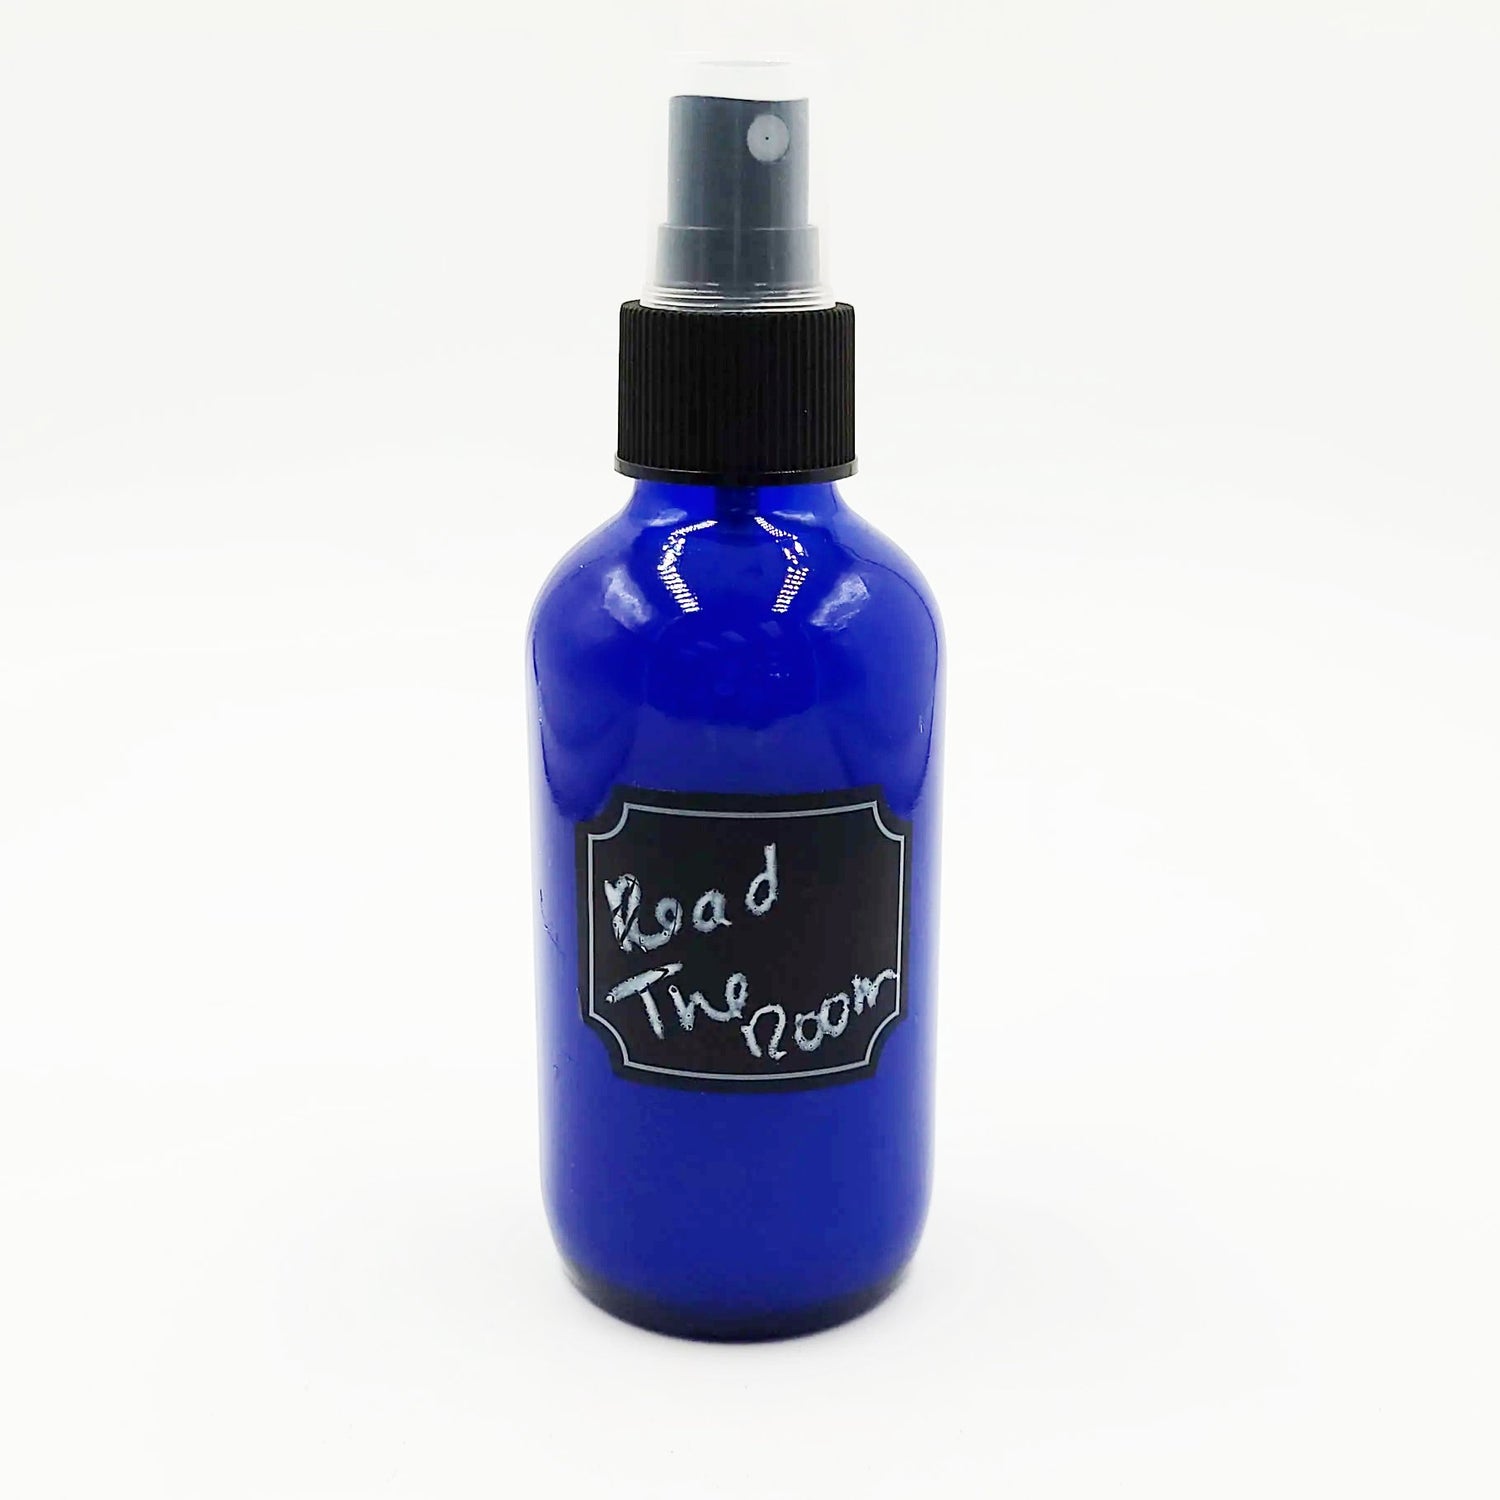 Read the Room Spray 4oz Spiritual Cologne - Elevated Metaphysical